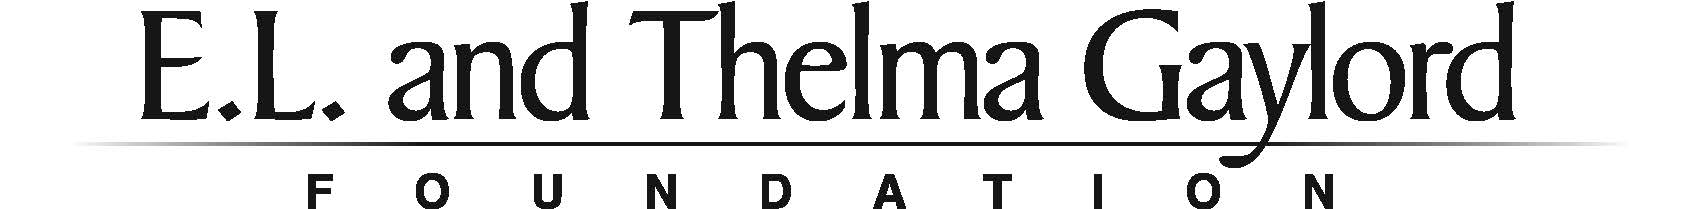 E.L. and Thelma Gaylord Foundation Logo